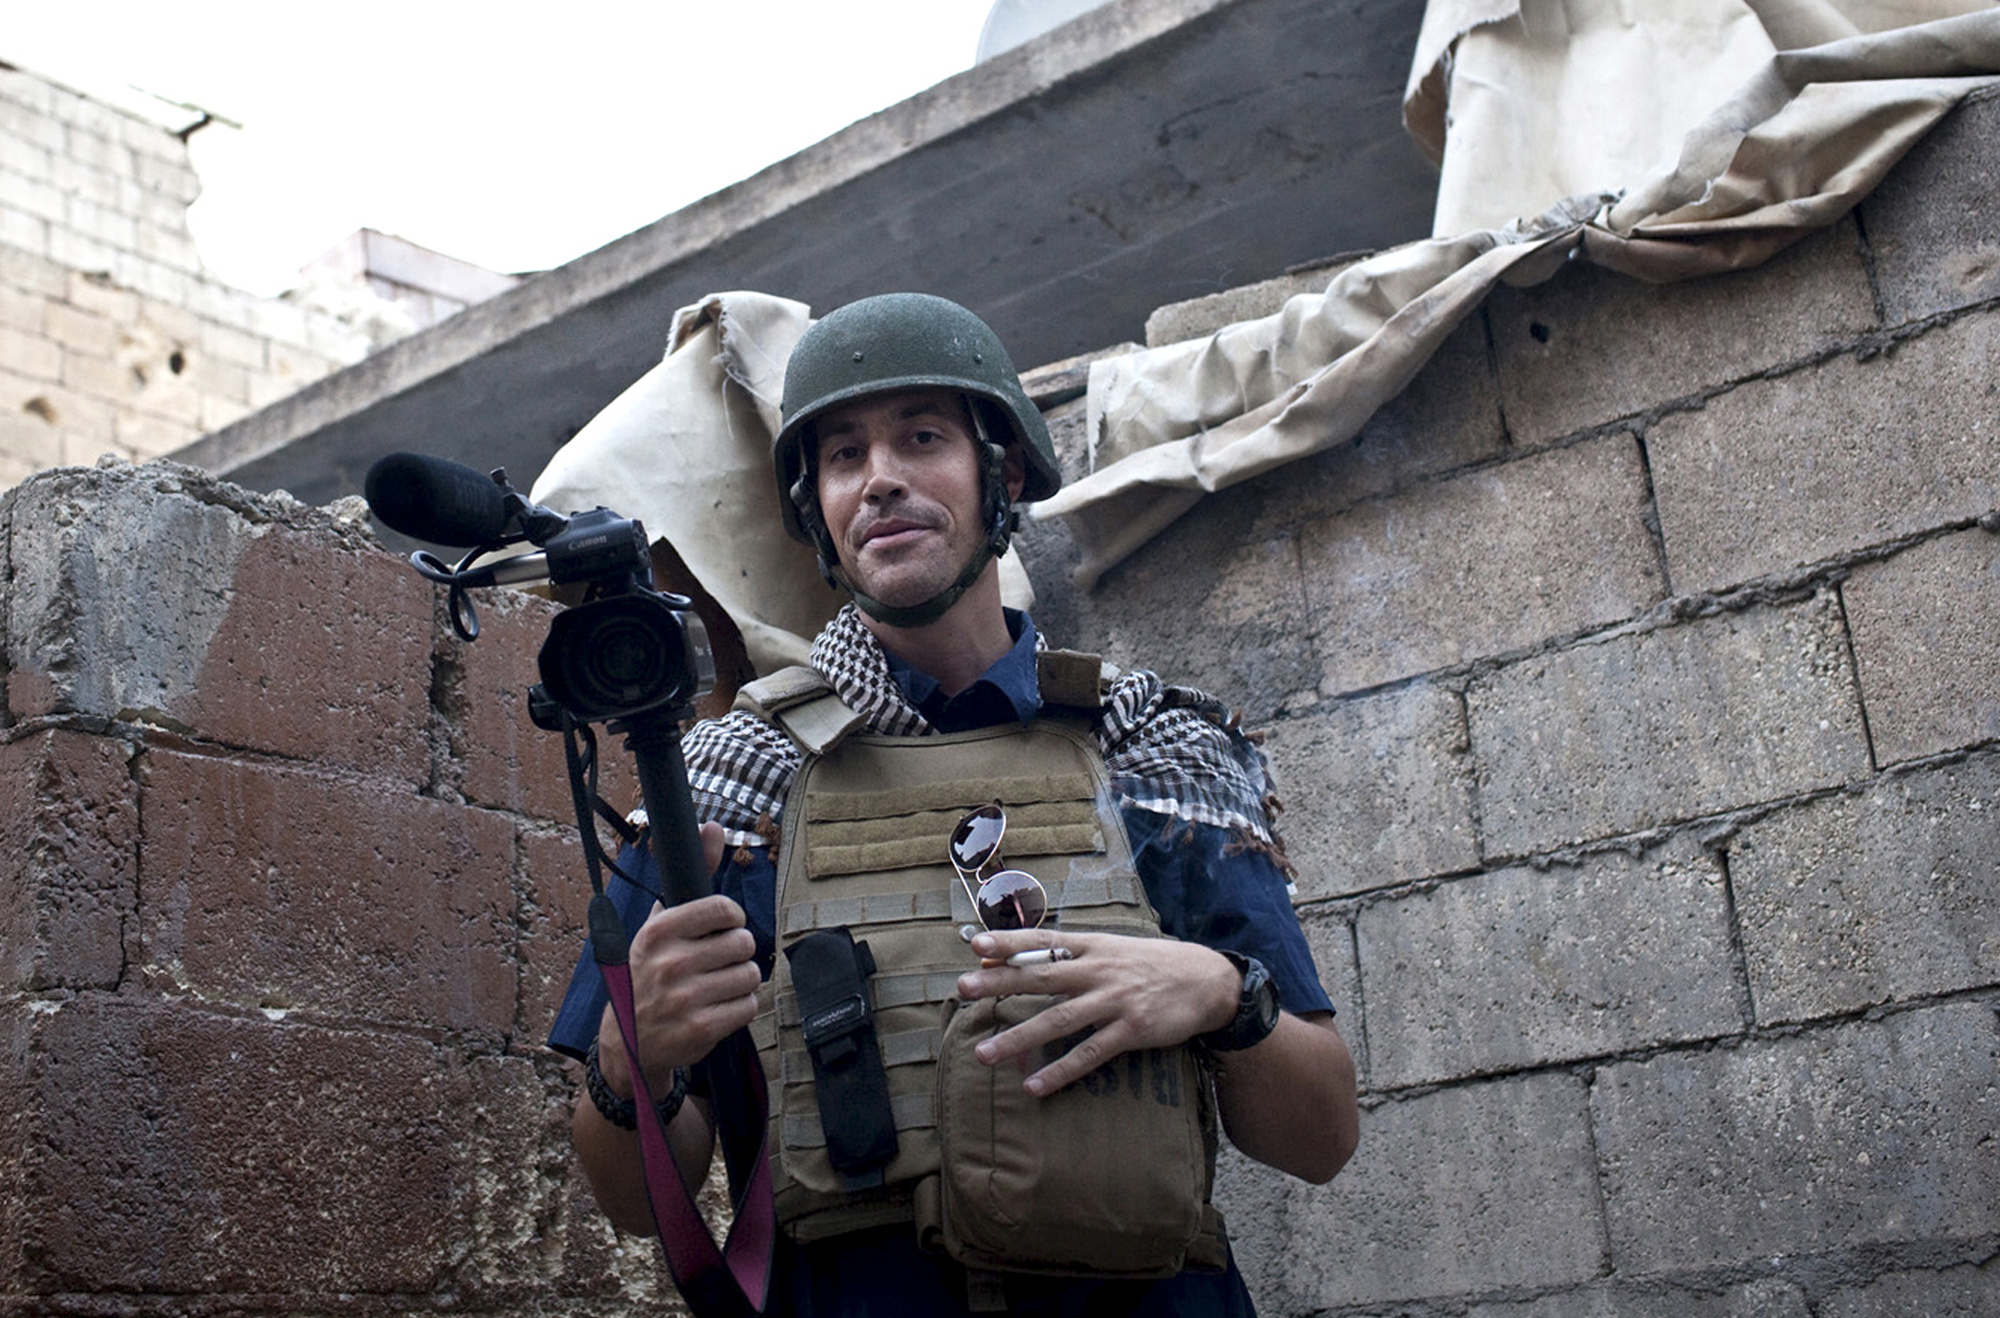 PHOTO: A November 2012 file photo shows journalist James Foley while covering the civil war in Aleppo, Syria. The Islamic State group released a video on Aug. 19, 2014, showing a jihadi beheading Foley, a 40-year-old journalist from Rochester, N.H.
